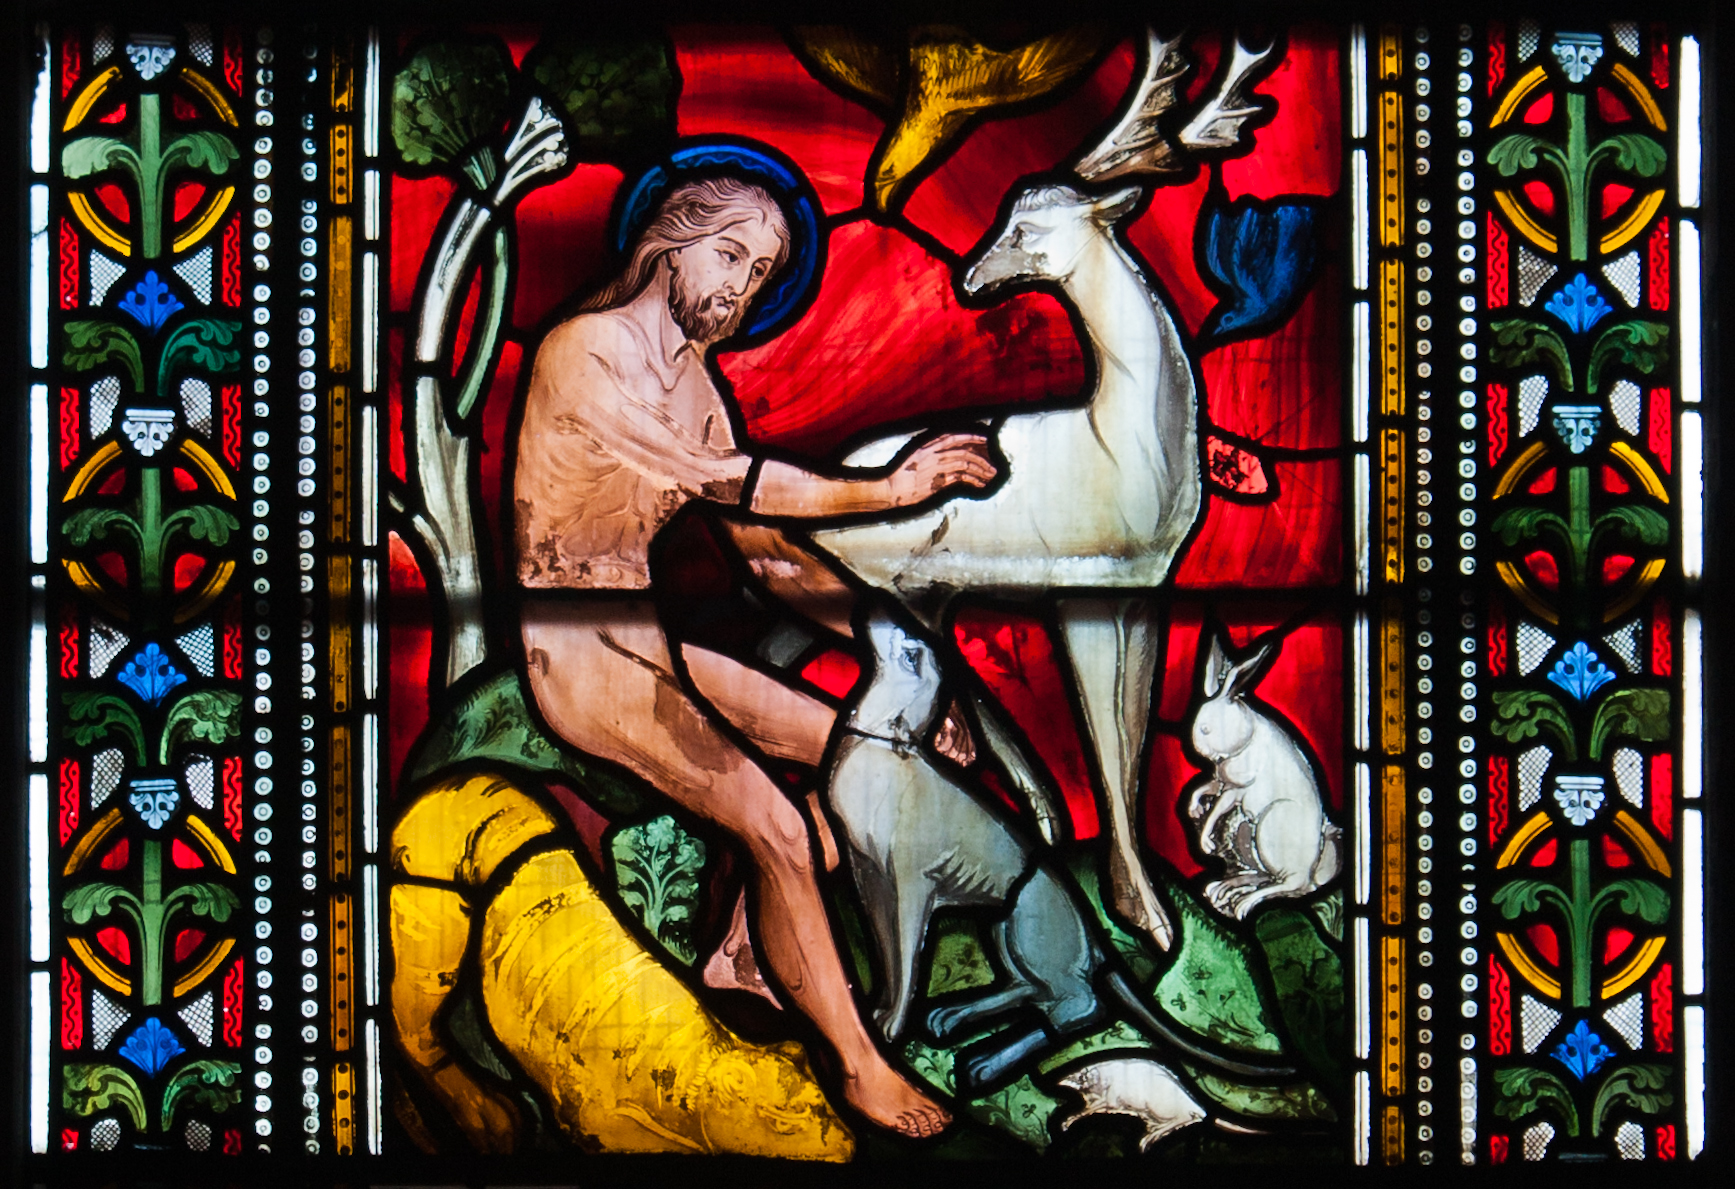 Dublin_Christ_Church_Cathedral_North_Aisle_Window_Cain_and_Abel_Detail_Adam_Naming_the_Animals_2012_09_26